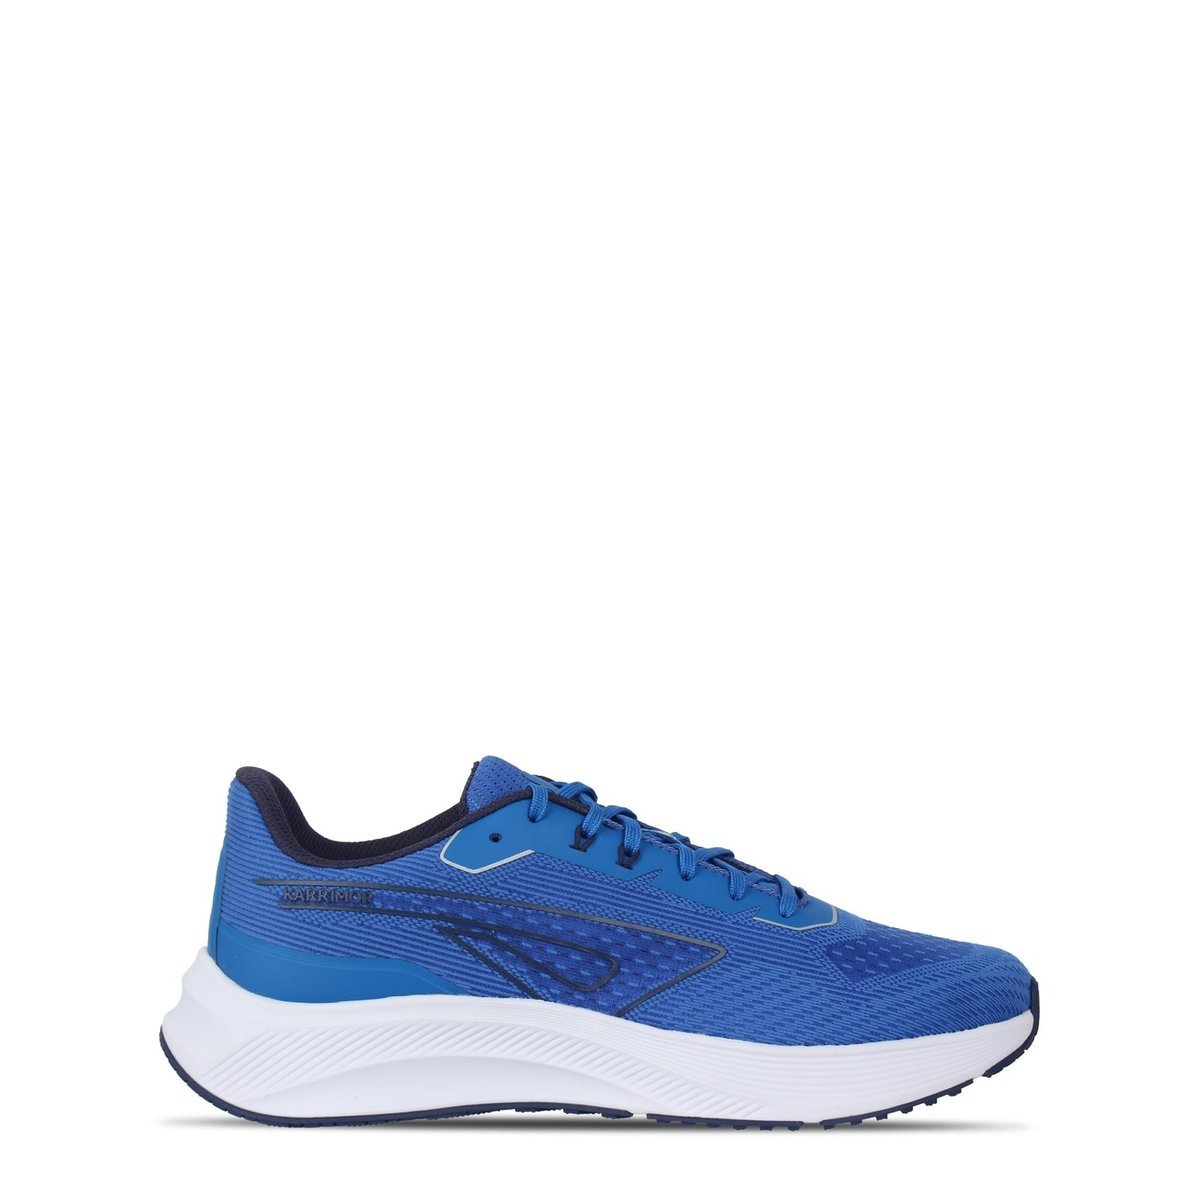 Karrimor Rugby Running Shoes